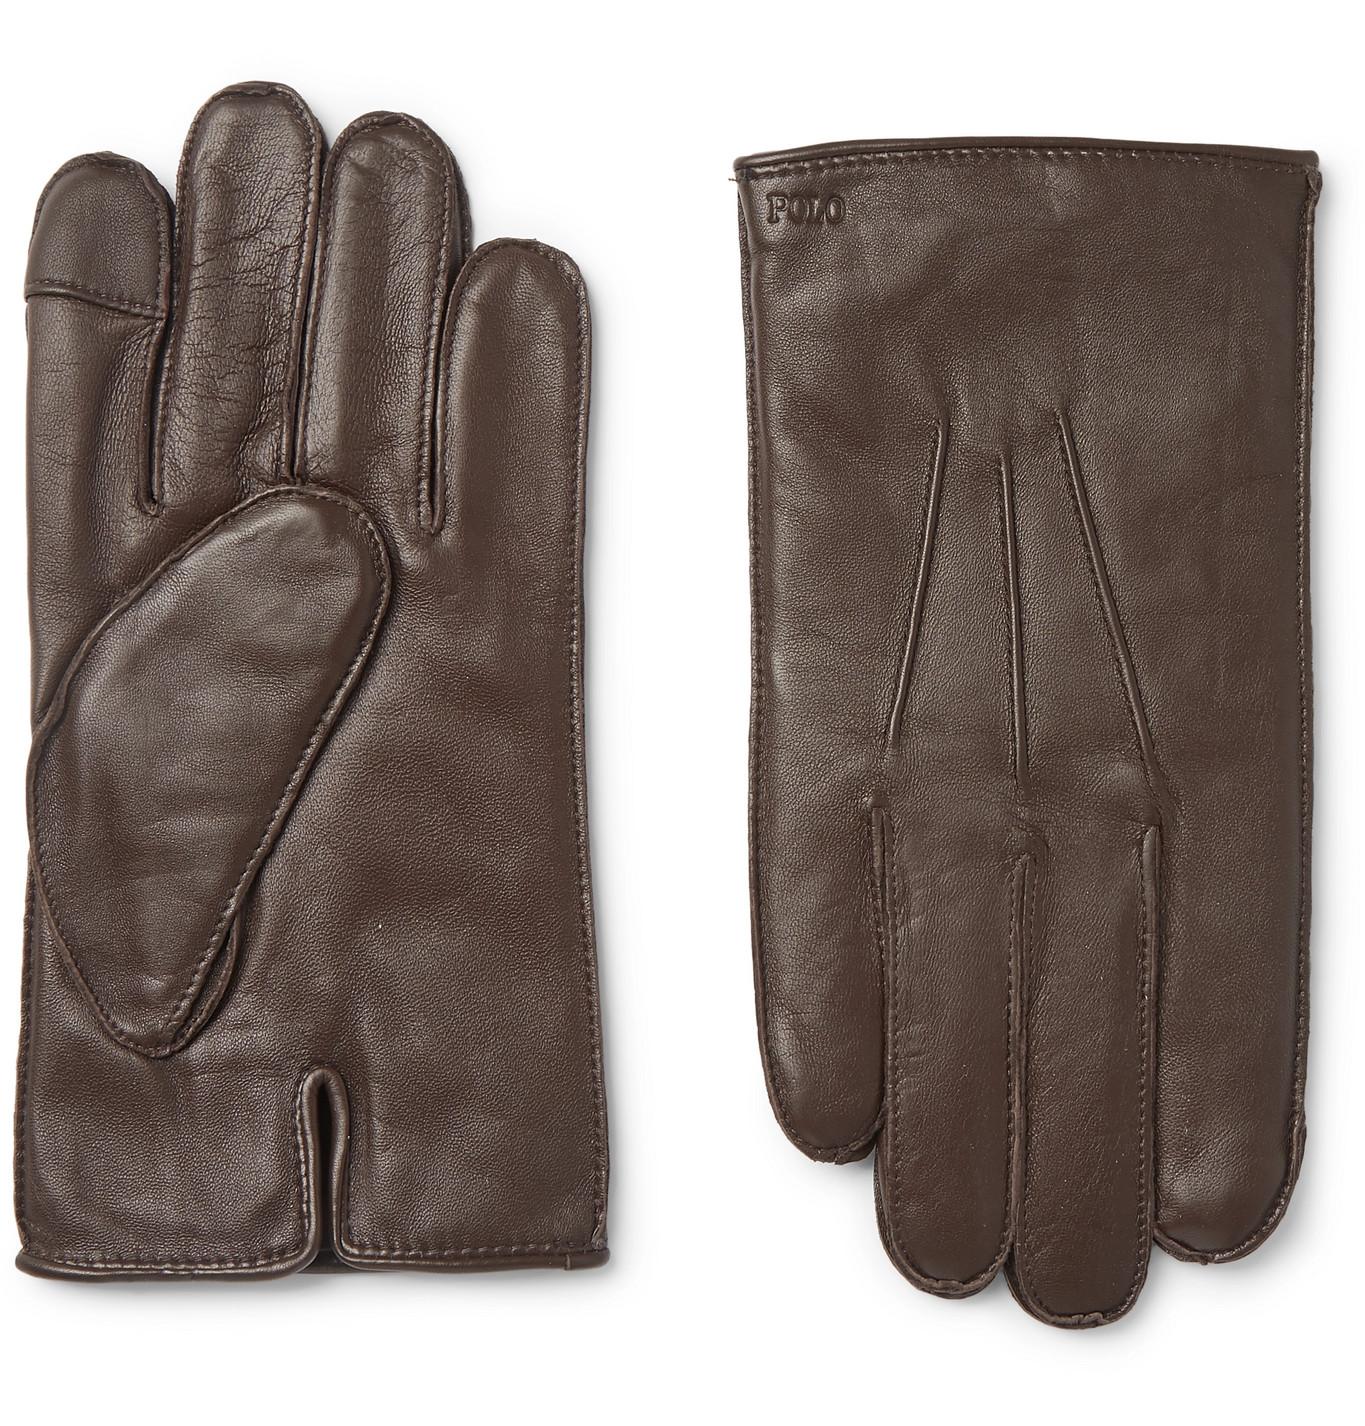 Polo Ralph Lauren Leather Gloves in Brown for Men - Lyst